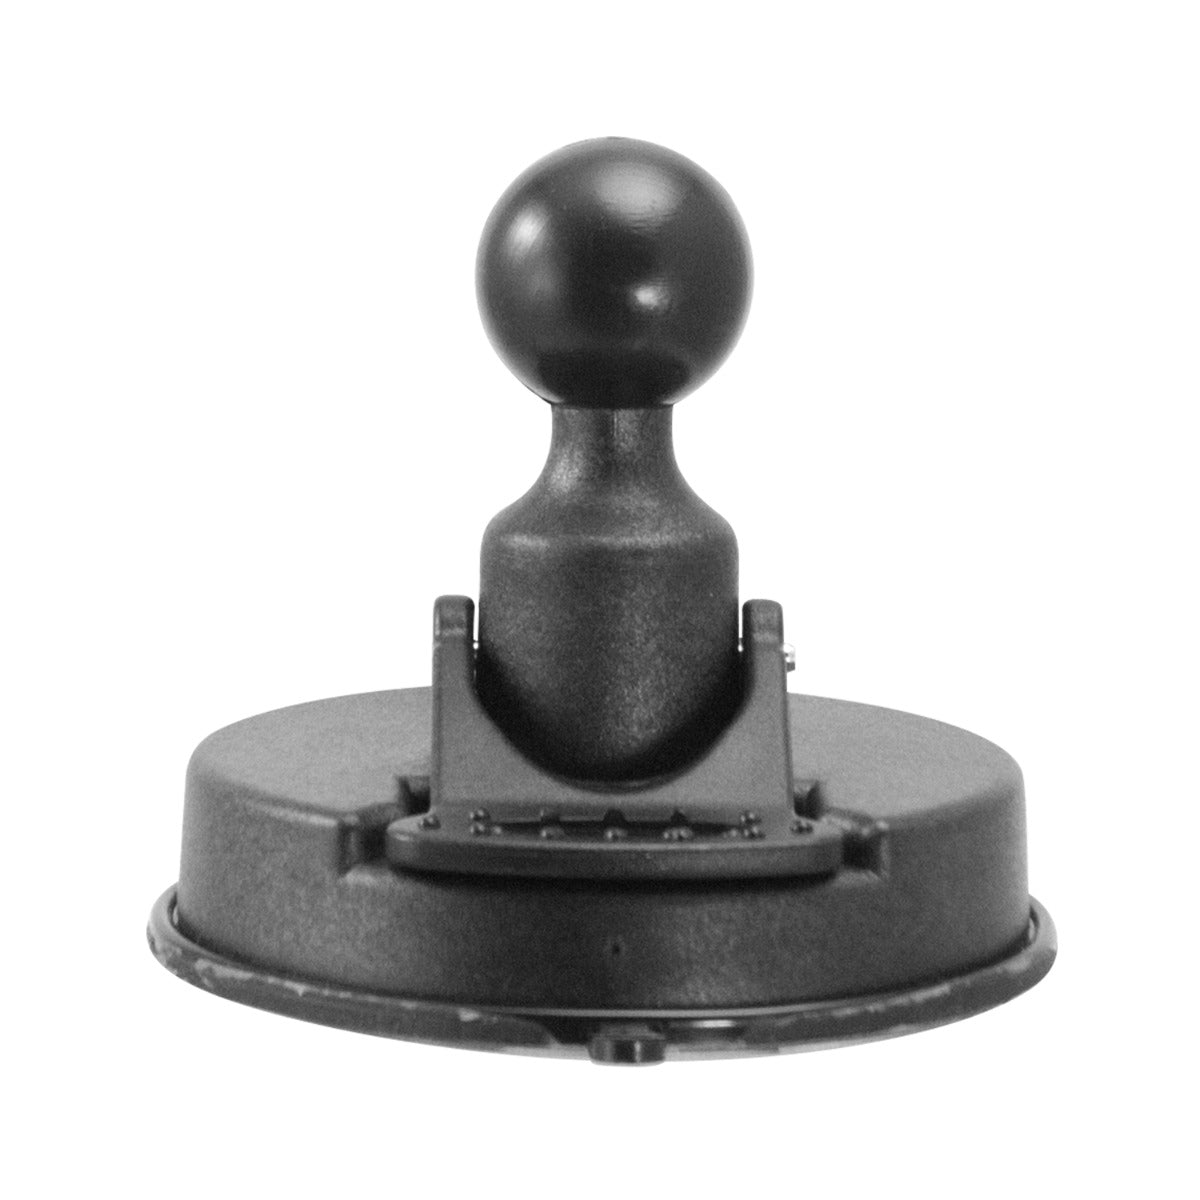 iBOLT™ 25mm / 1 inch Ball to “Sticky-Suction” Cup Mount